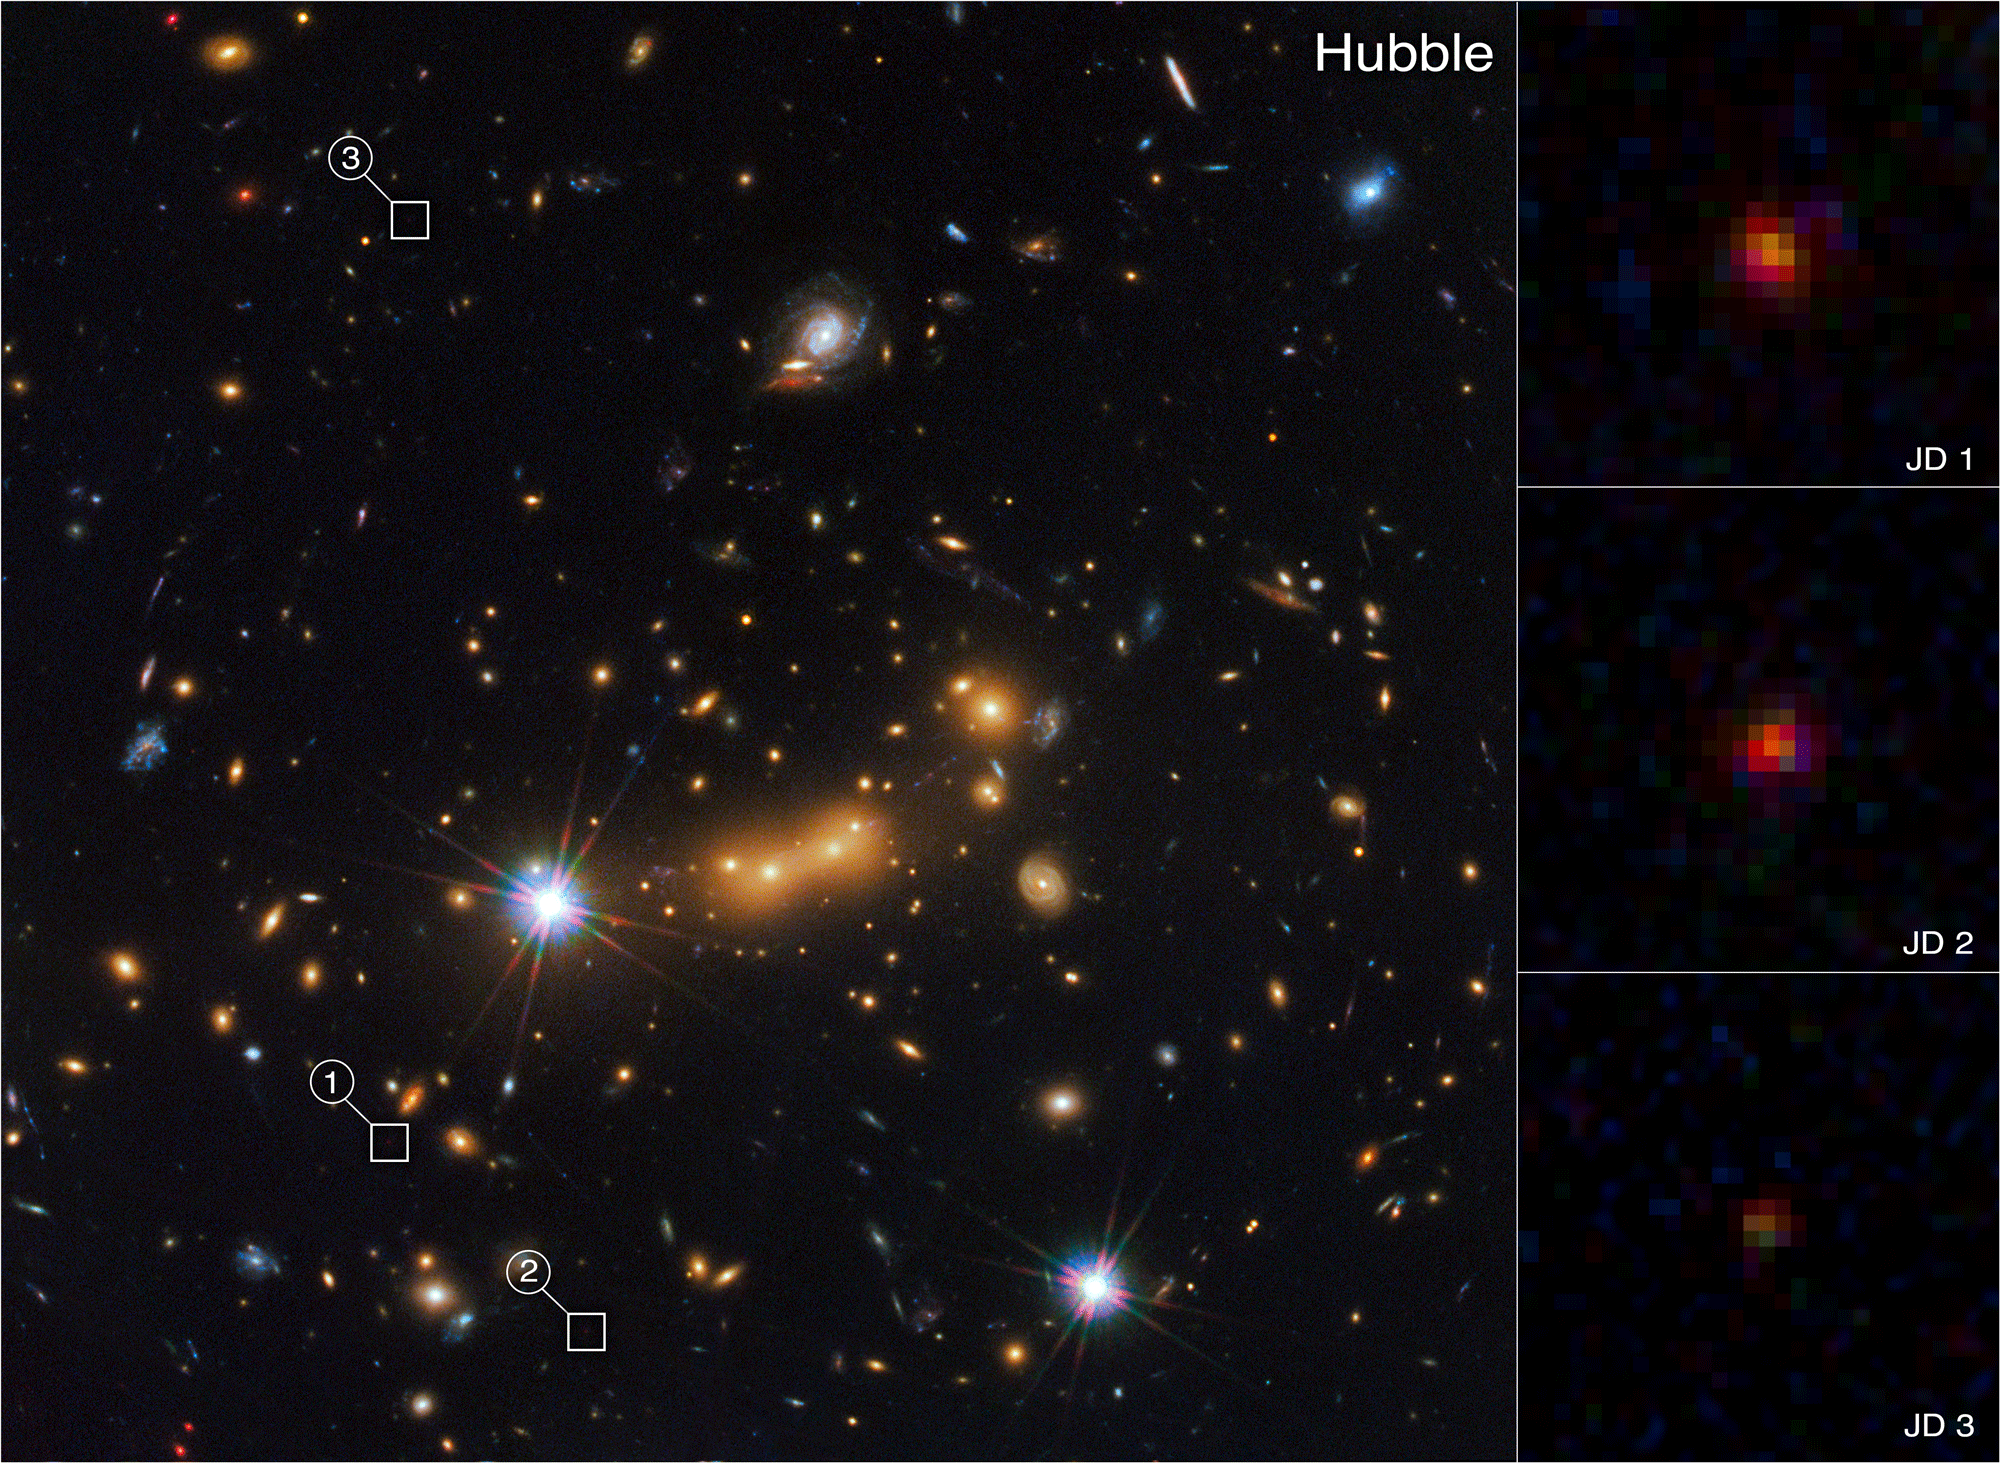 A comparison of galaxies seen from Hubble vs Webb.